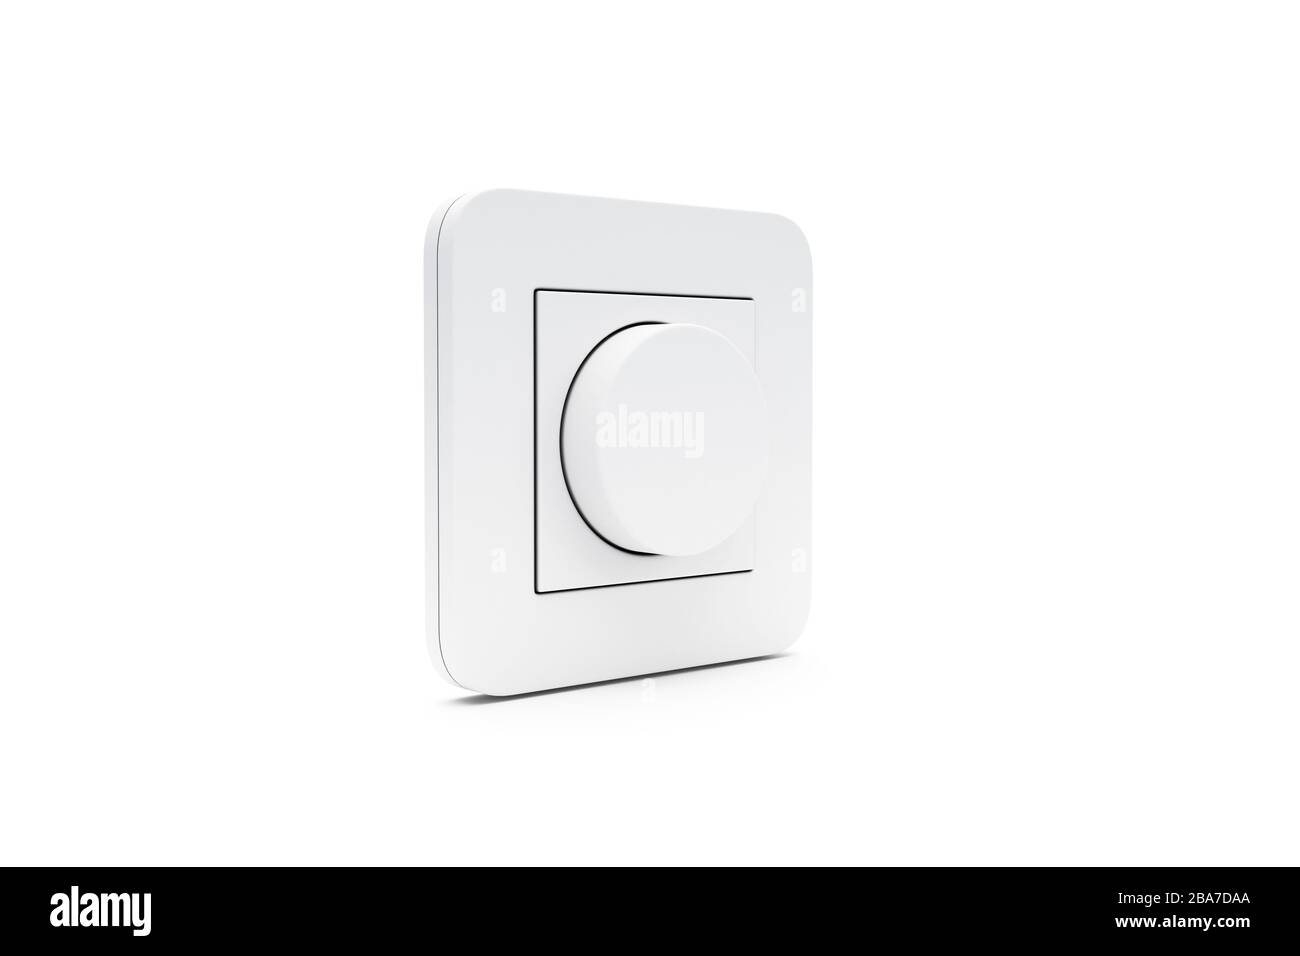 3d rendering, front view of circle lighting switch on or off electric,  isolated on white background Stock Photo - Alamy